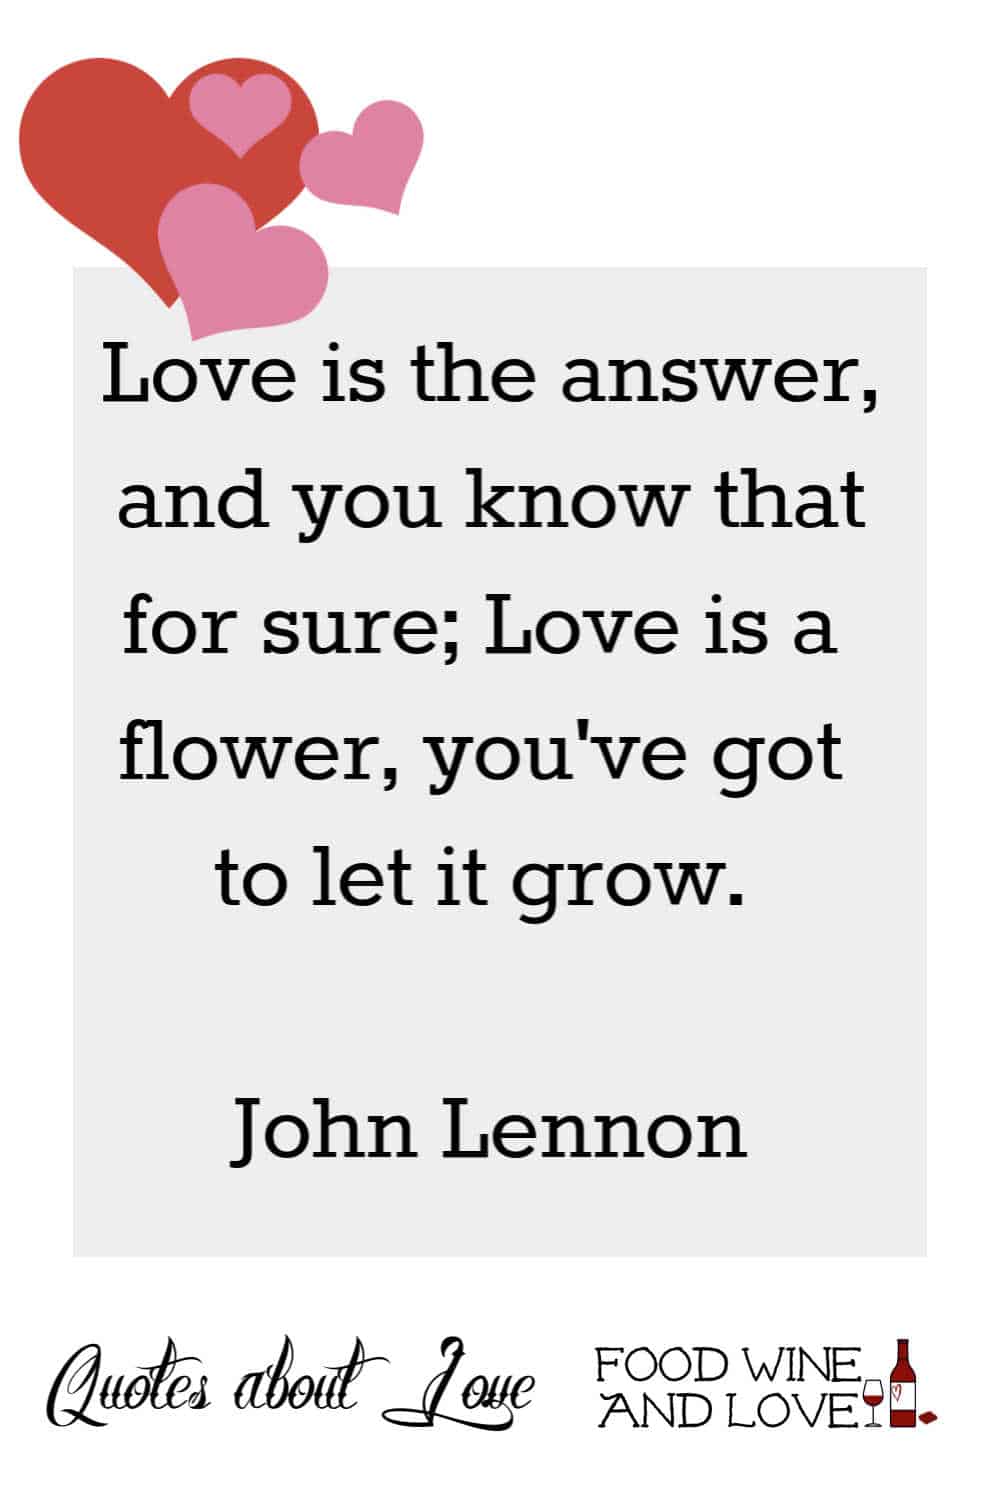 Love is the answer, and you know that for sure; Love is a flower, you've got to let it grow.  John Lennon